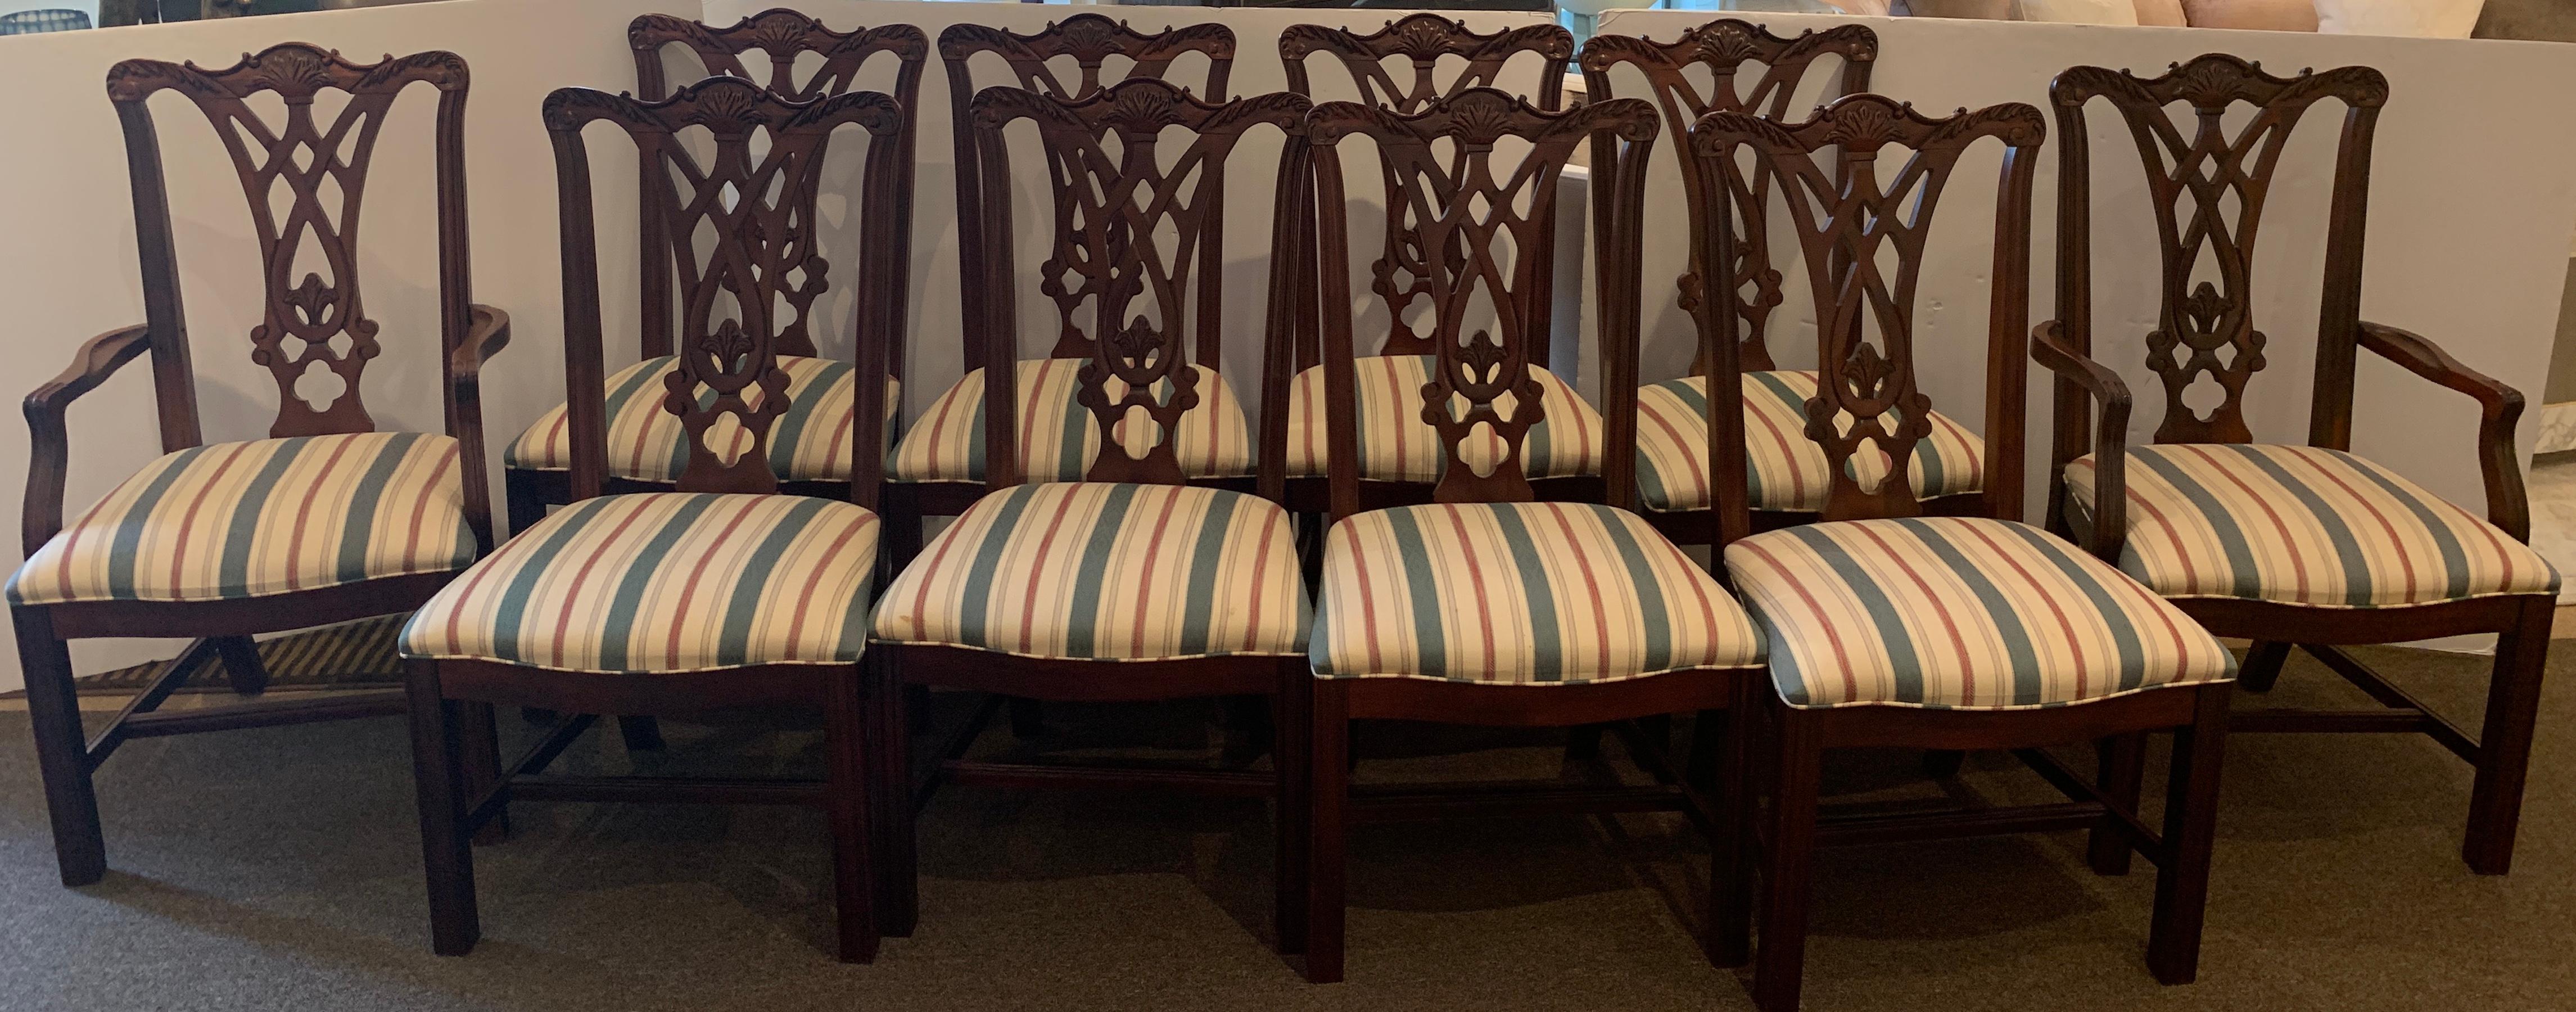 Ten Georgian style mahogany dining room chairs, by Thomasville.
Consisting of two armchairs and eight side chairs. Each one with carved and pierced backrest, raised on Marlborough legs.

Armchair measures 40